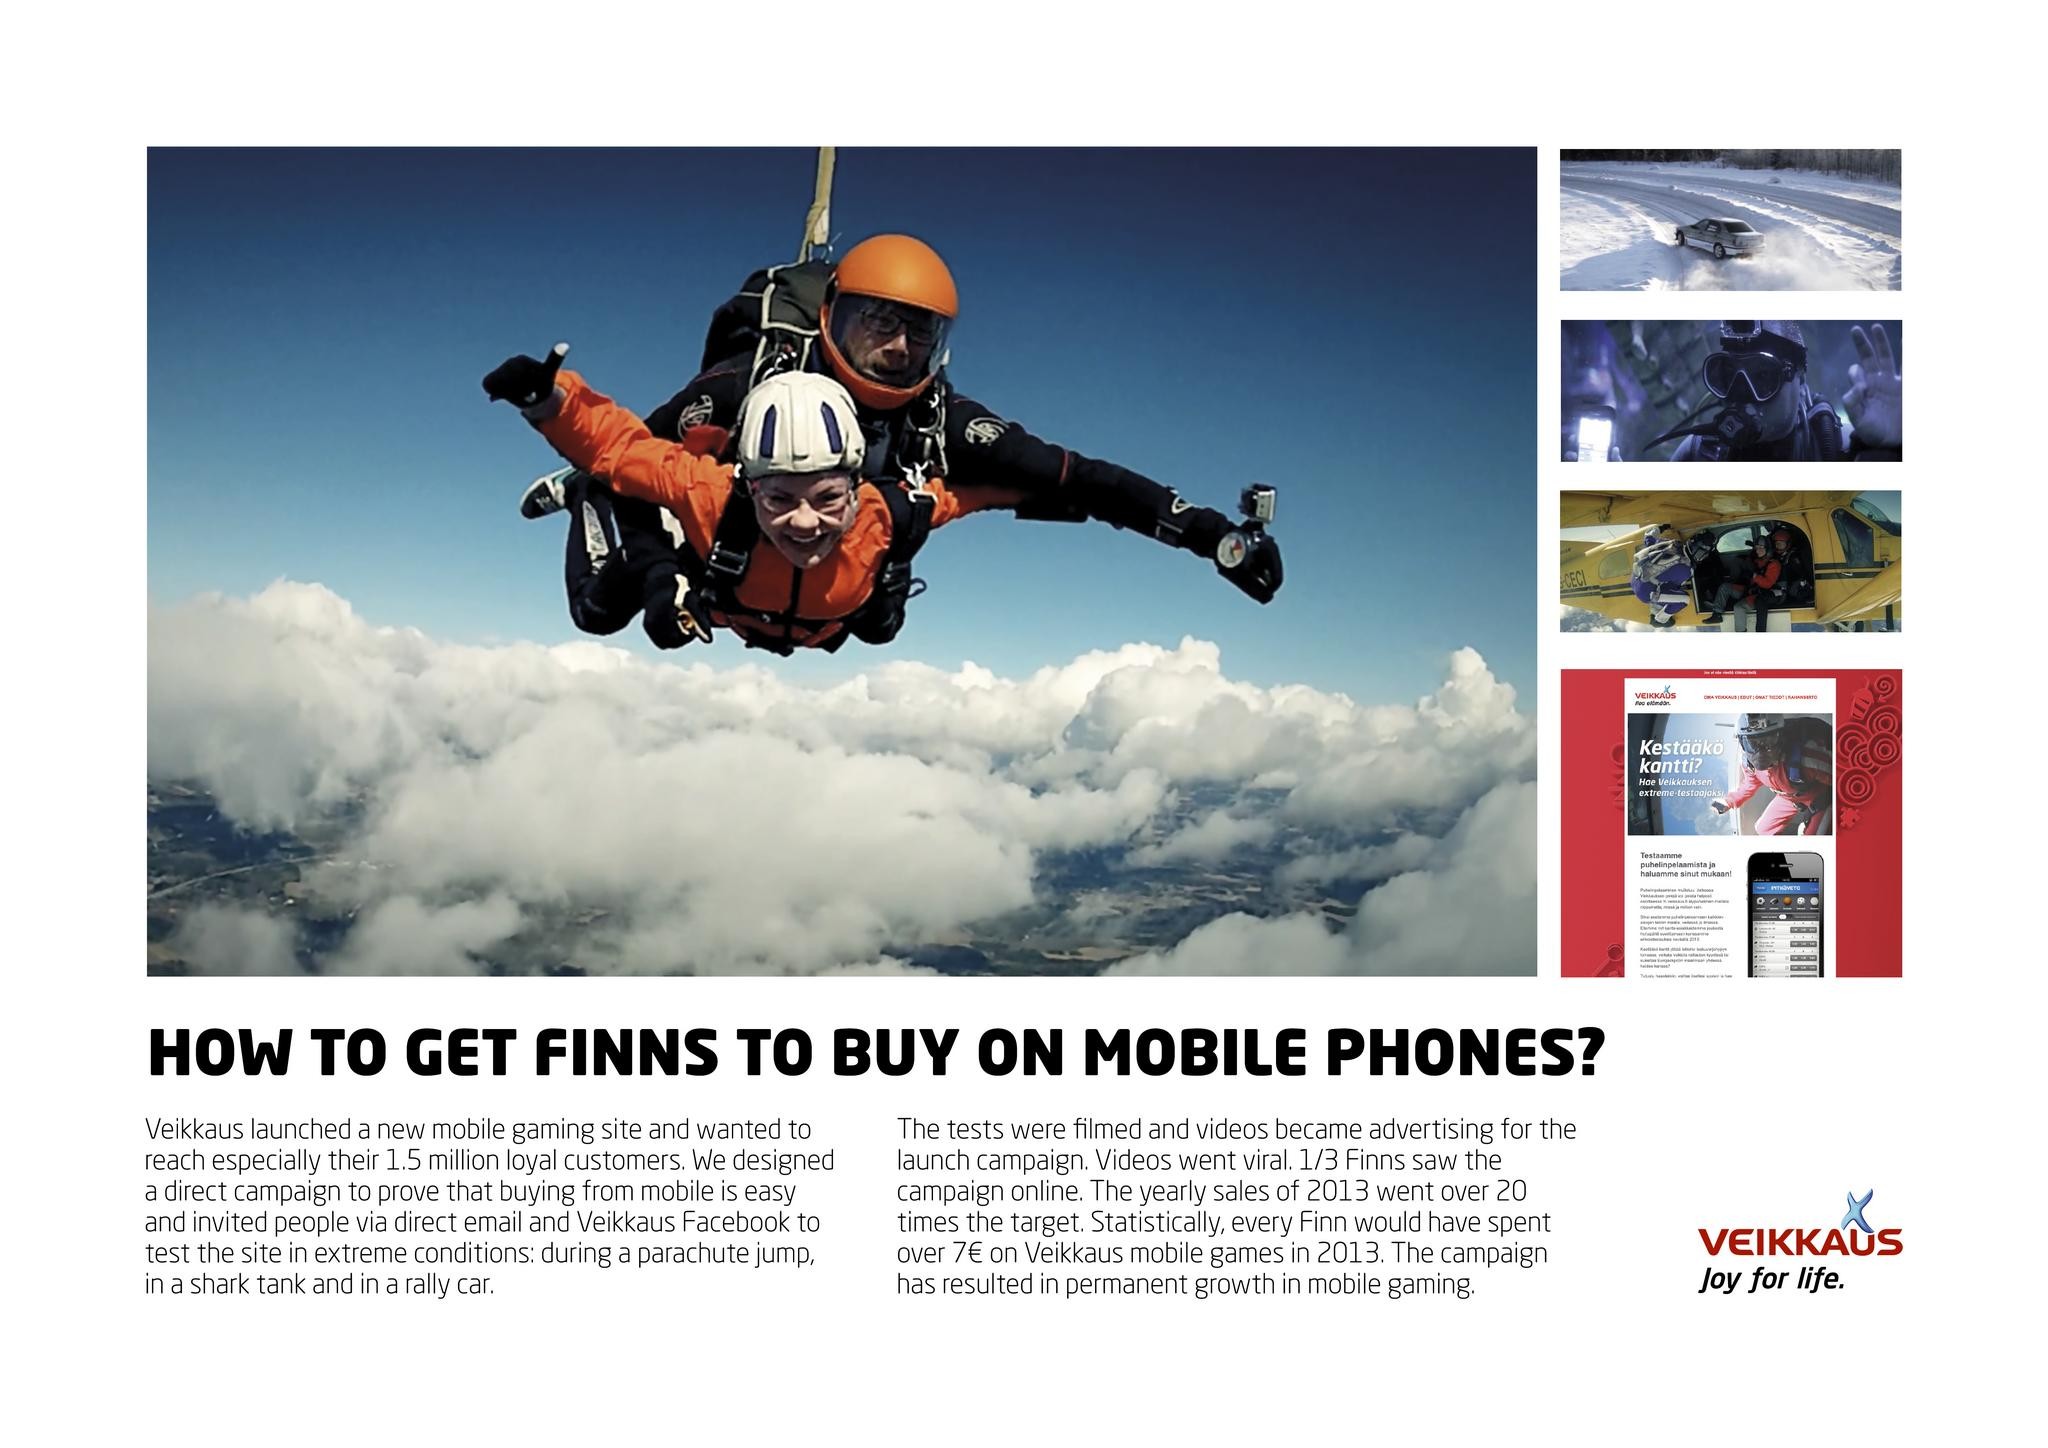 HOW TO GET FINNS TO BUY ON MOBILE PHONES?